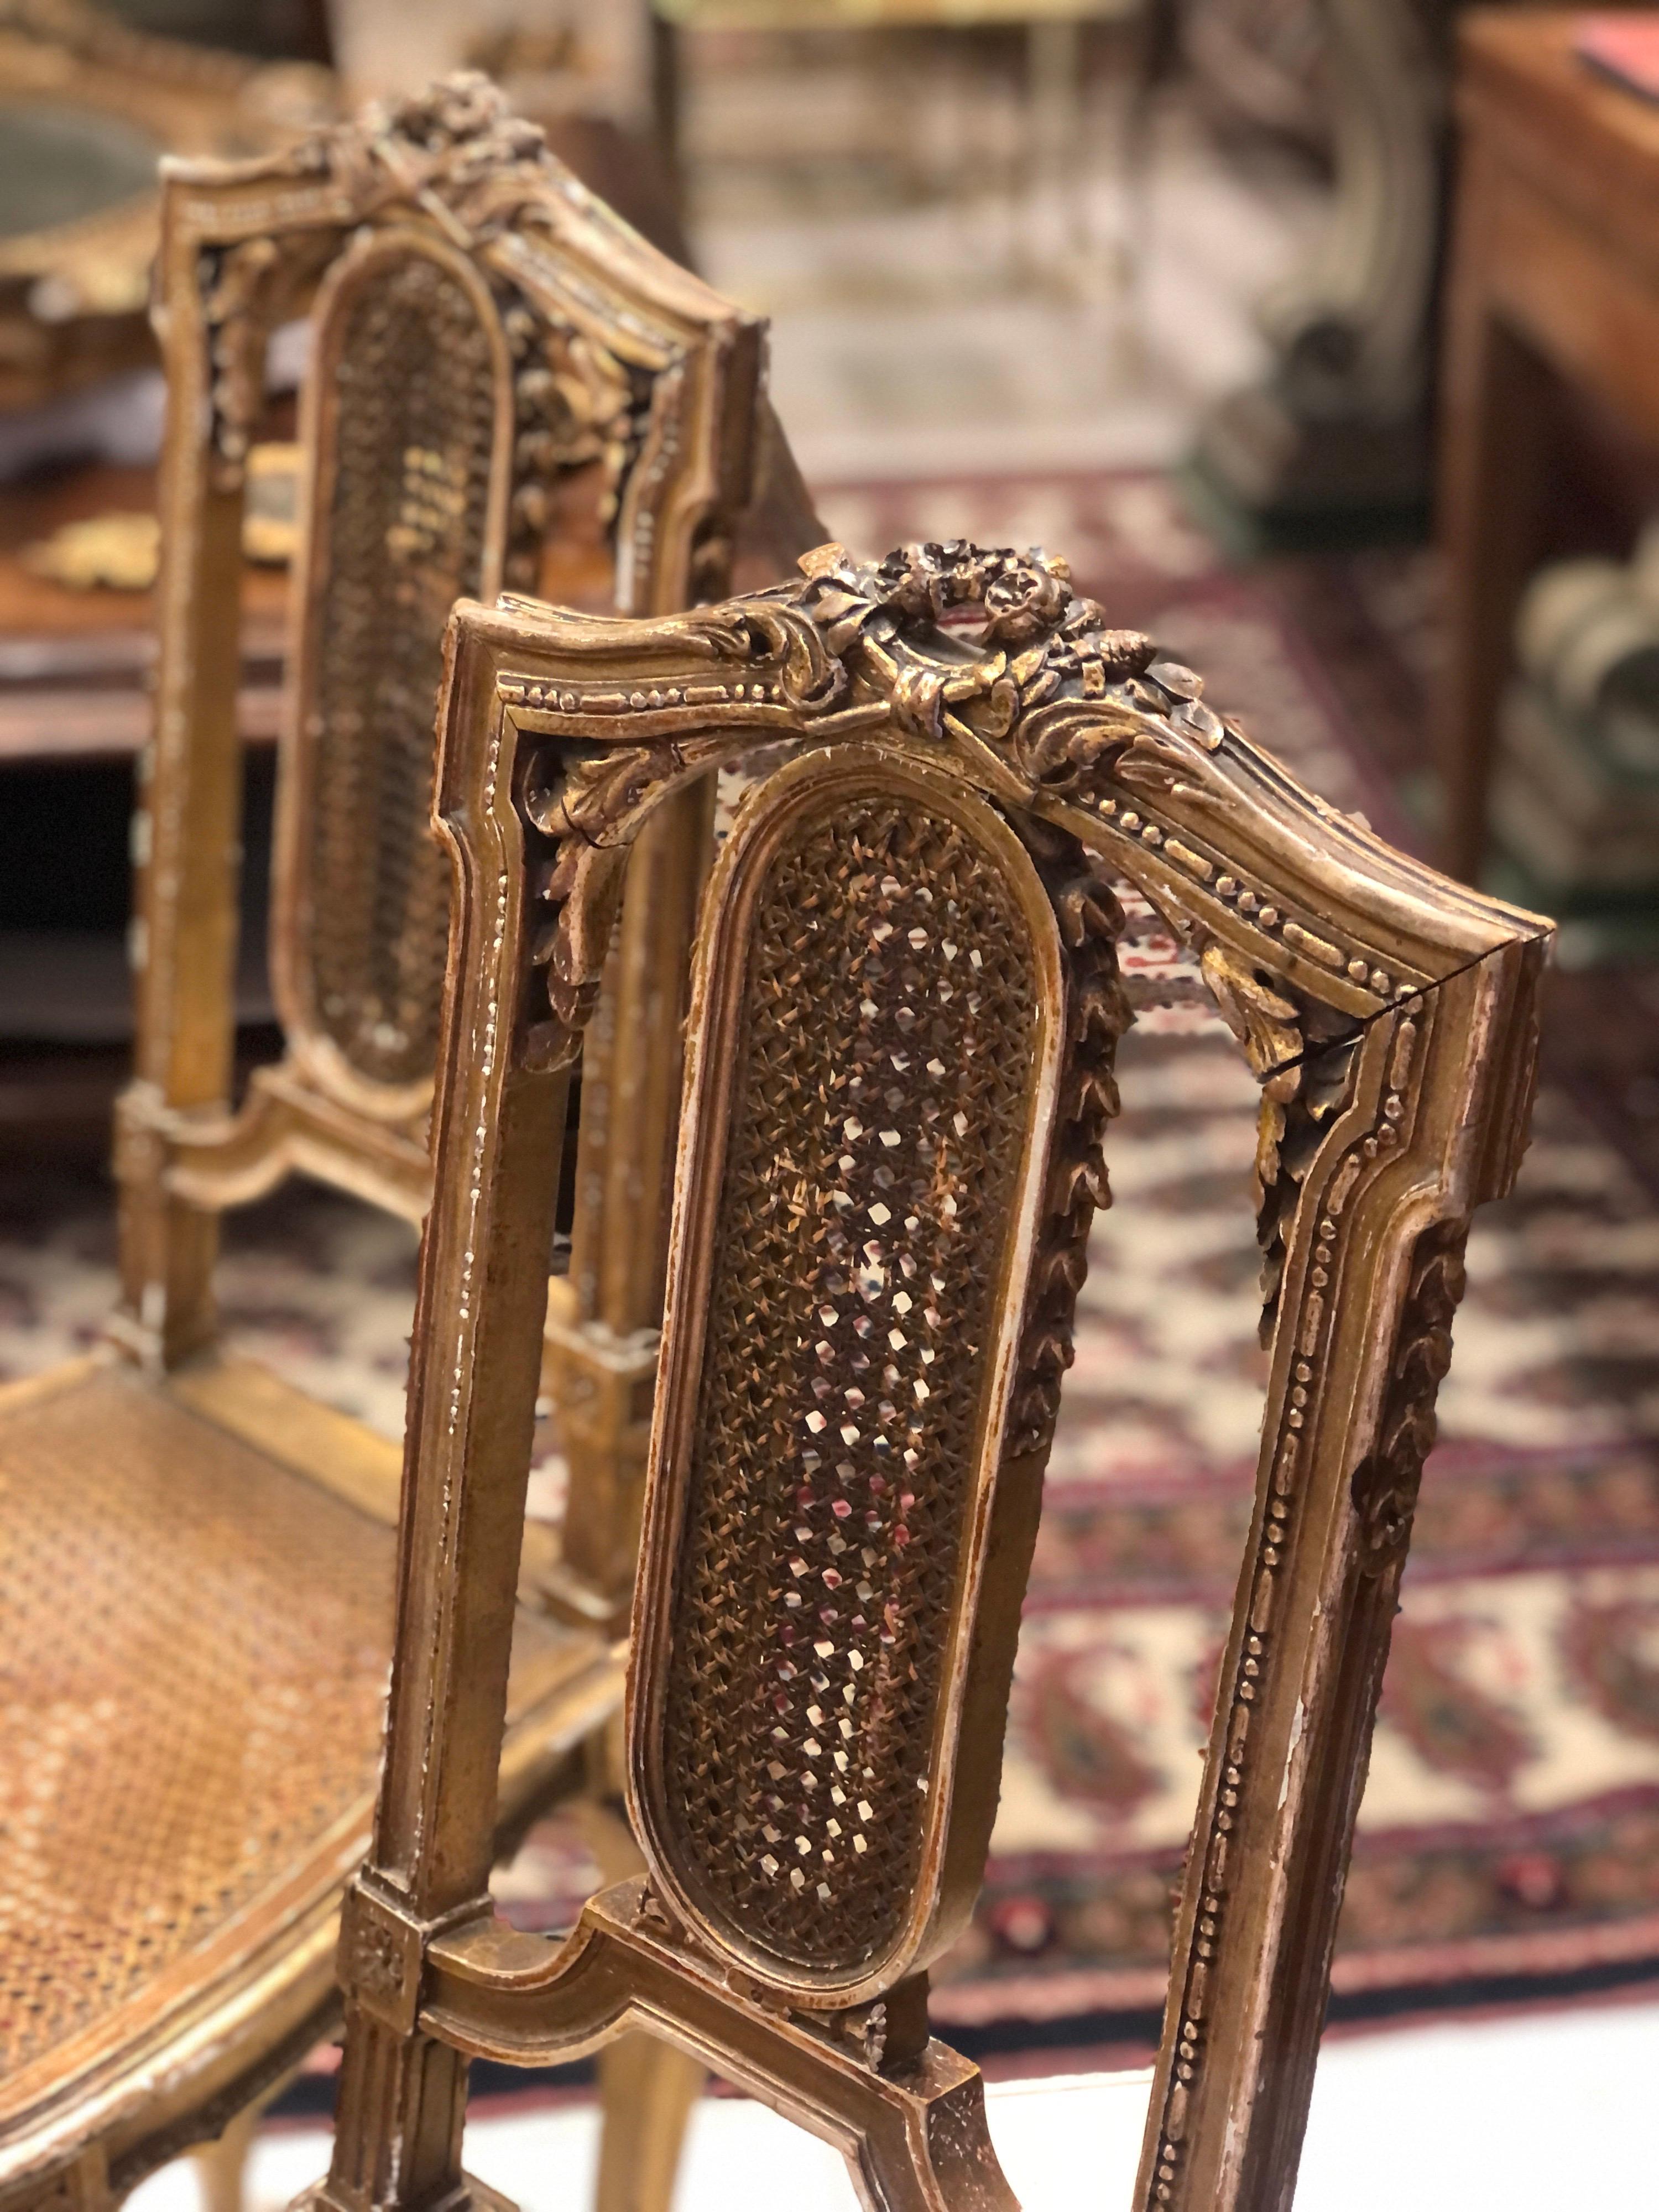 Elegant gilt wood chairs with rich floral decoration resting on curved legs in Louis XVI style.
France, circa 1890.